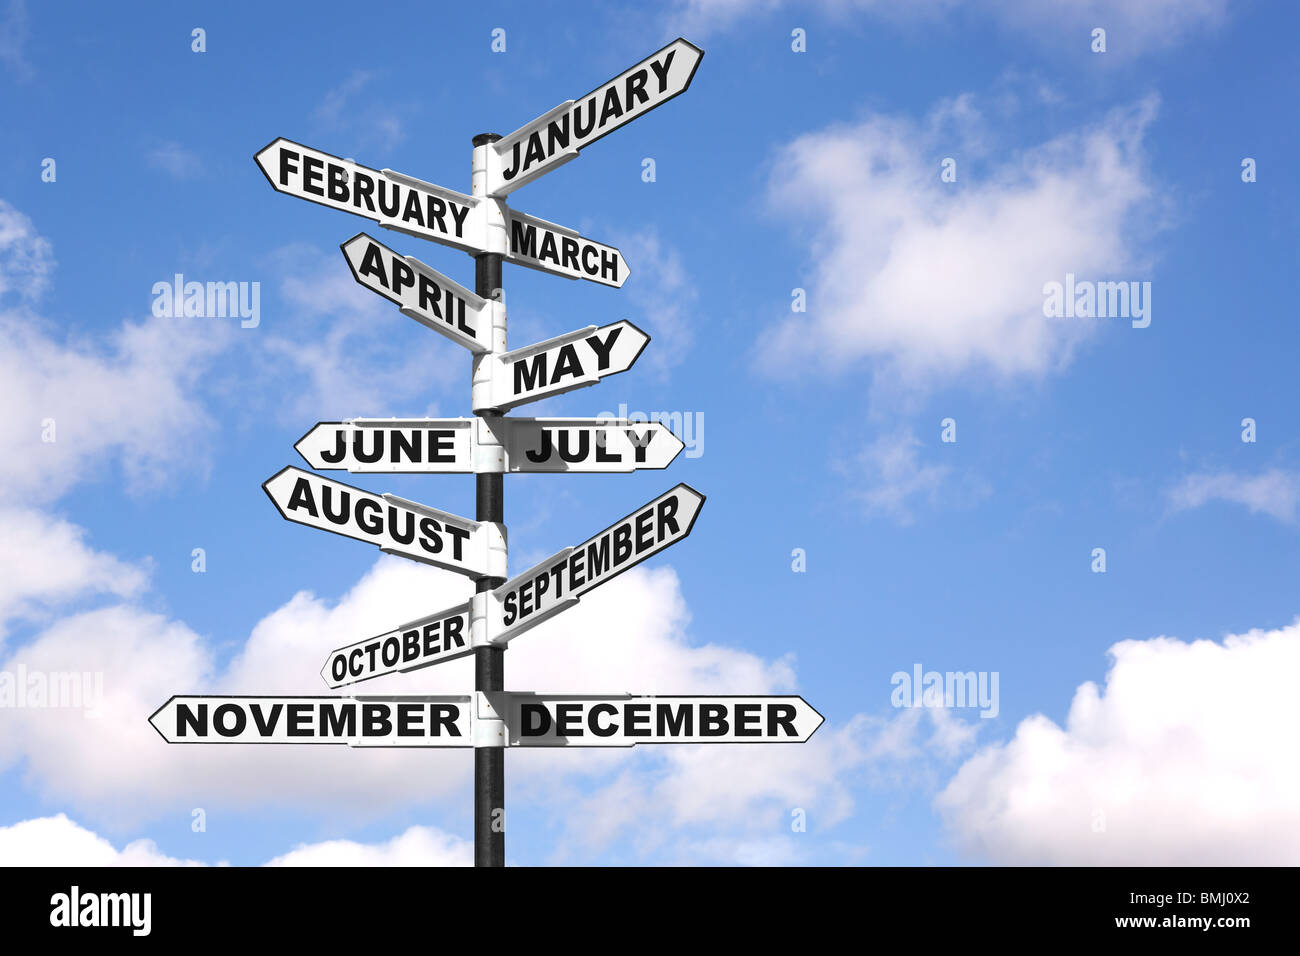 A directional signpost showing the months of the year against a blue cloudy sky. Stock Photo